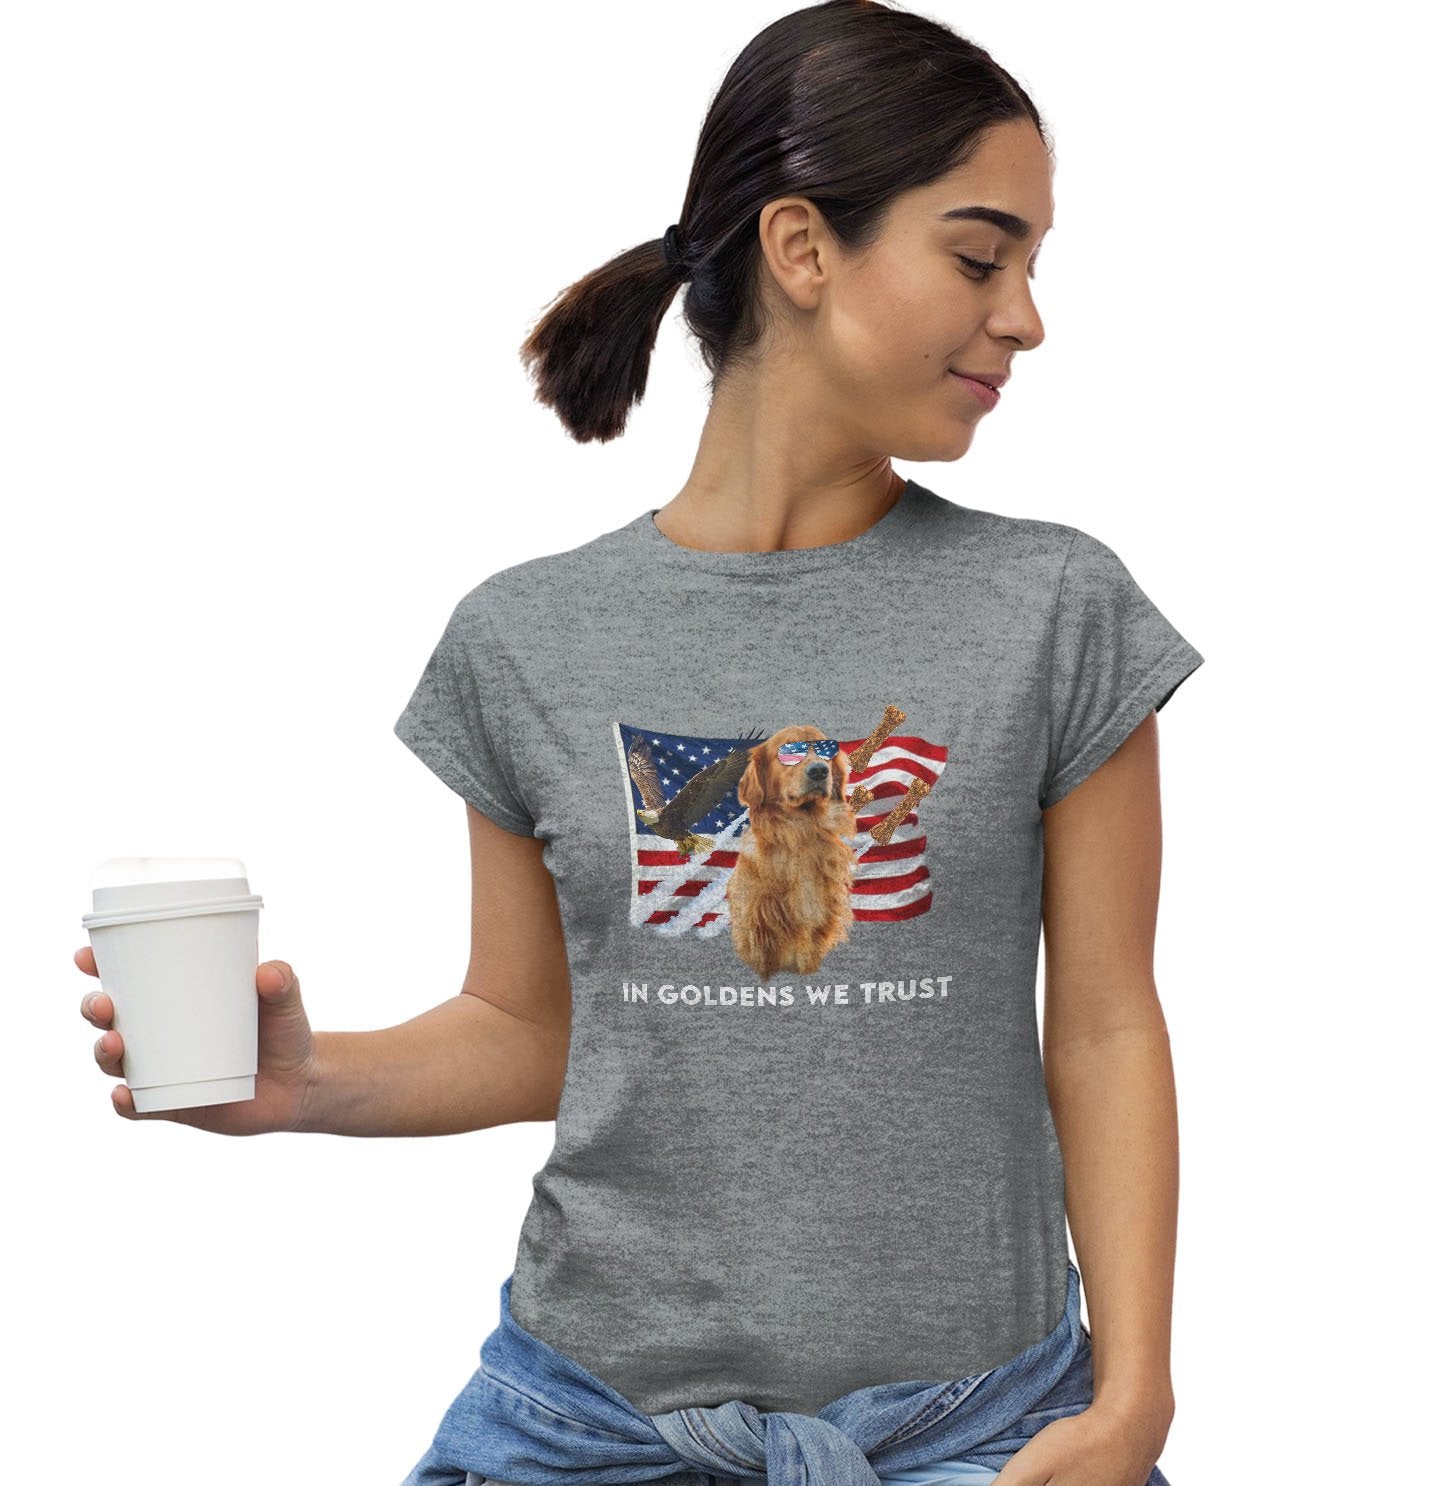 In Golden we Trust - Women's Fitted T-Shirt